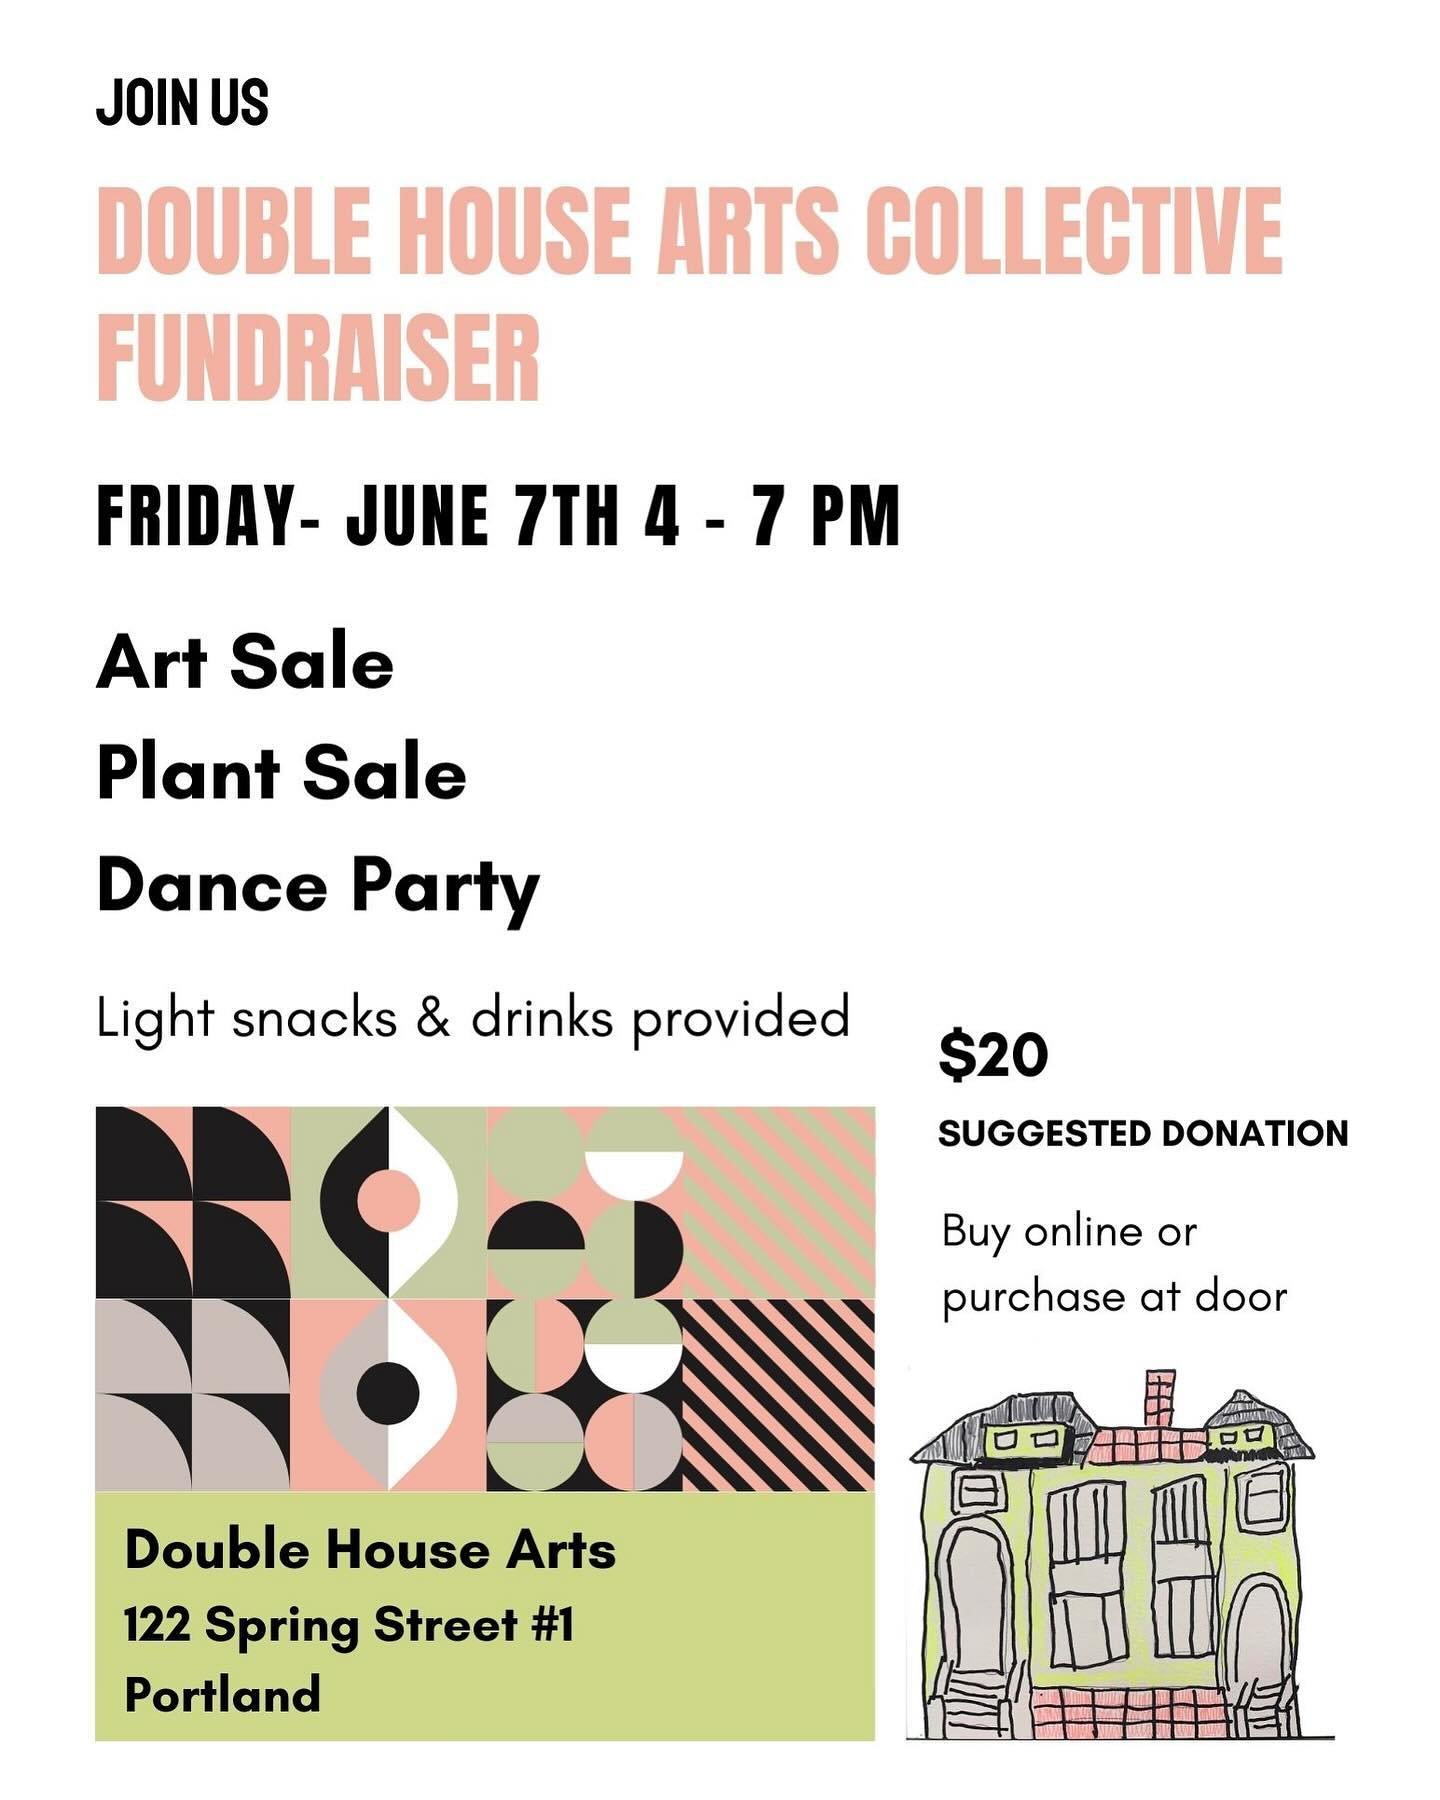 🪩🪴🖼️Come Support Us!🪩 🪴 🖼️ 

Join us Friday, June 7th from 4 till 7. We will be having a dance party, plant and art sale. Our community is what keeps us going and we need your support! RSVP online or purchase a ticket at the door. $20 suggested